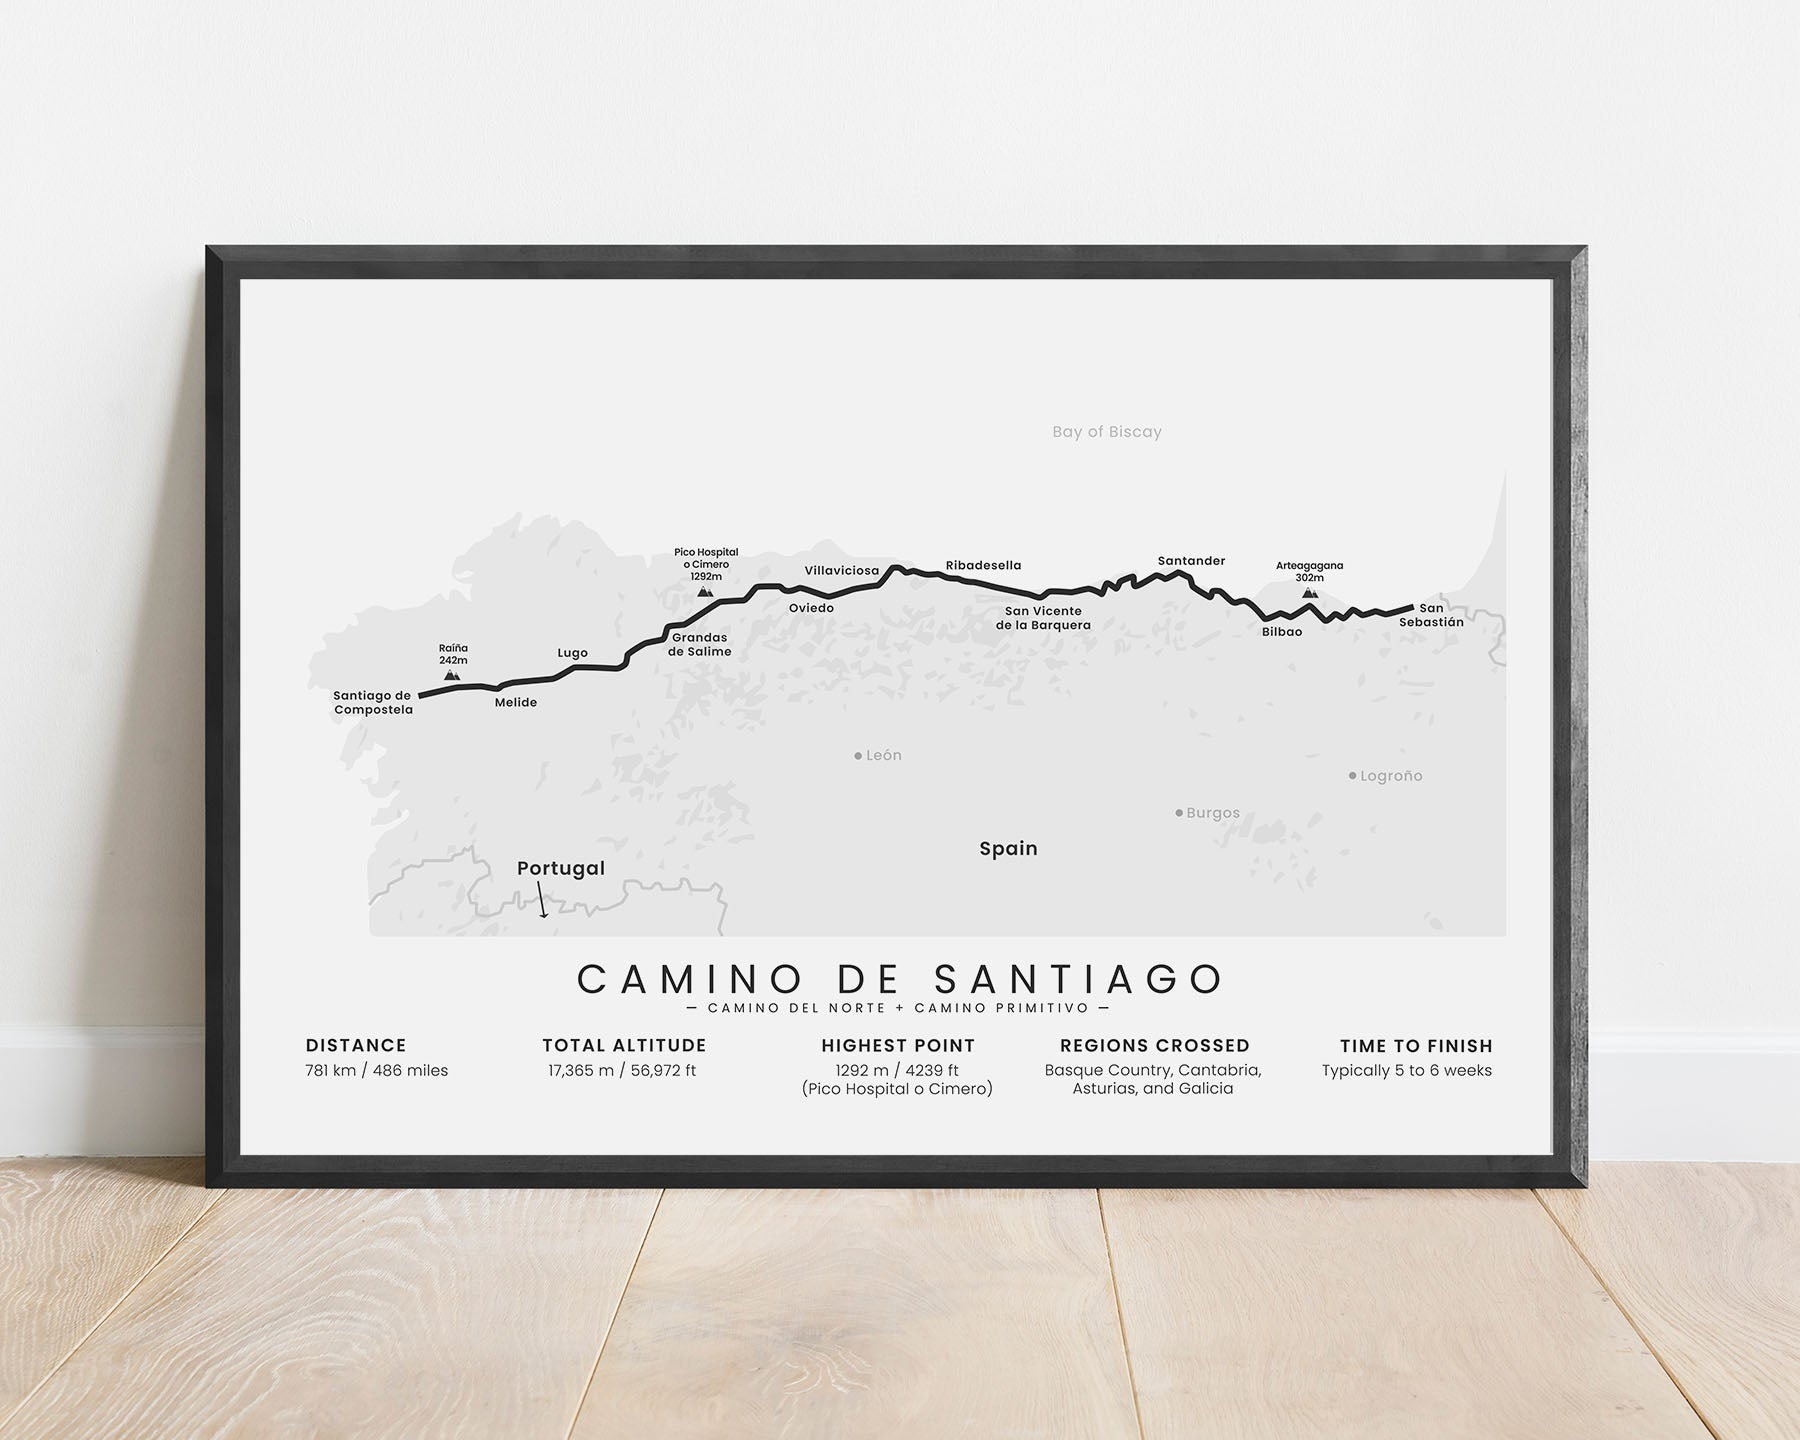 Camino de Santiago (Spain) hiking trail print with white background